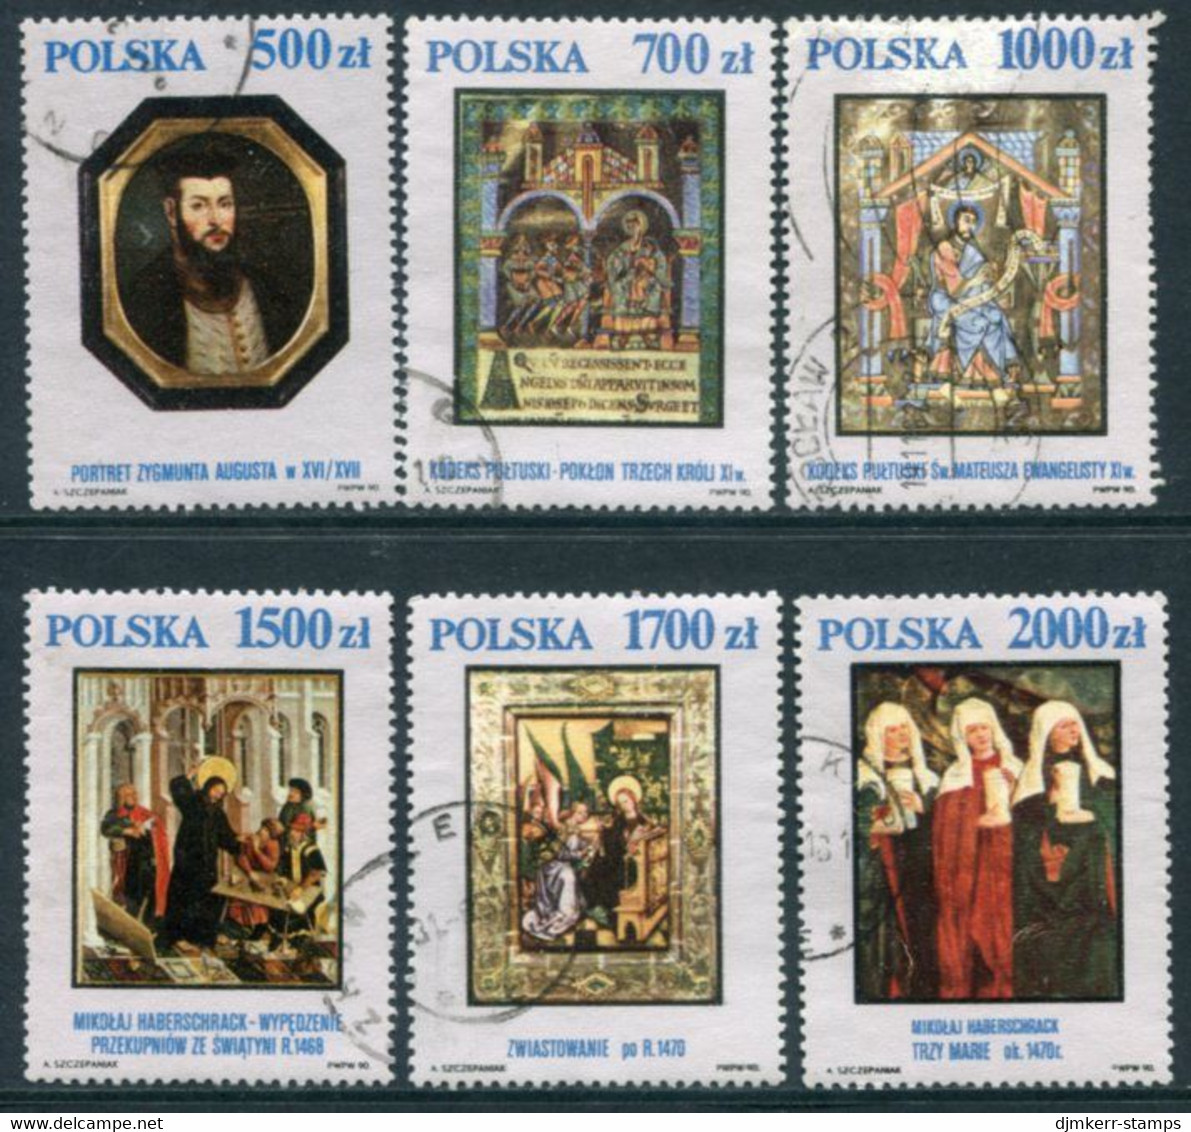 POLAND 1991 Paintings From National Museum Used.  Michel 3306-11 - Gebruikt